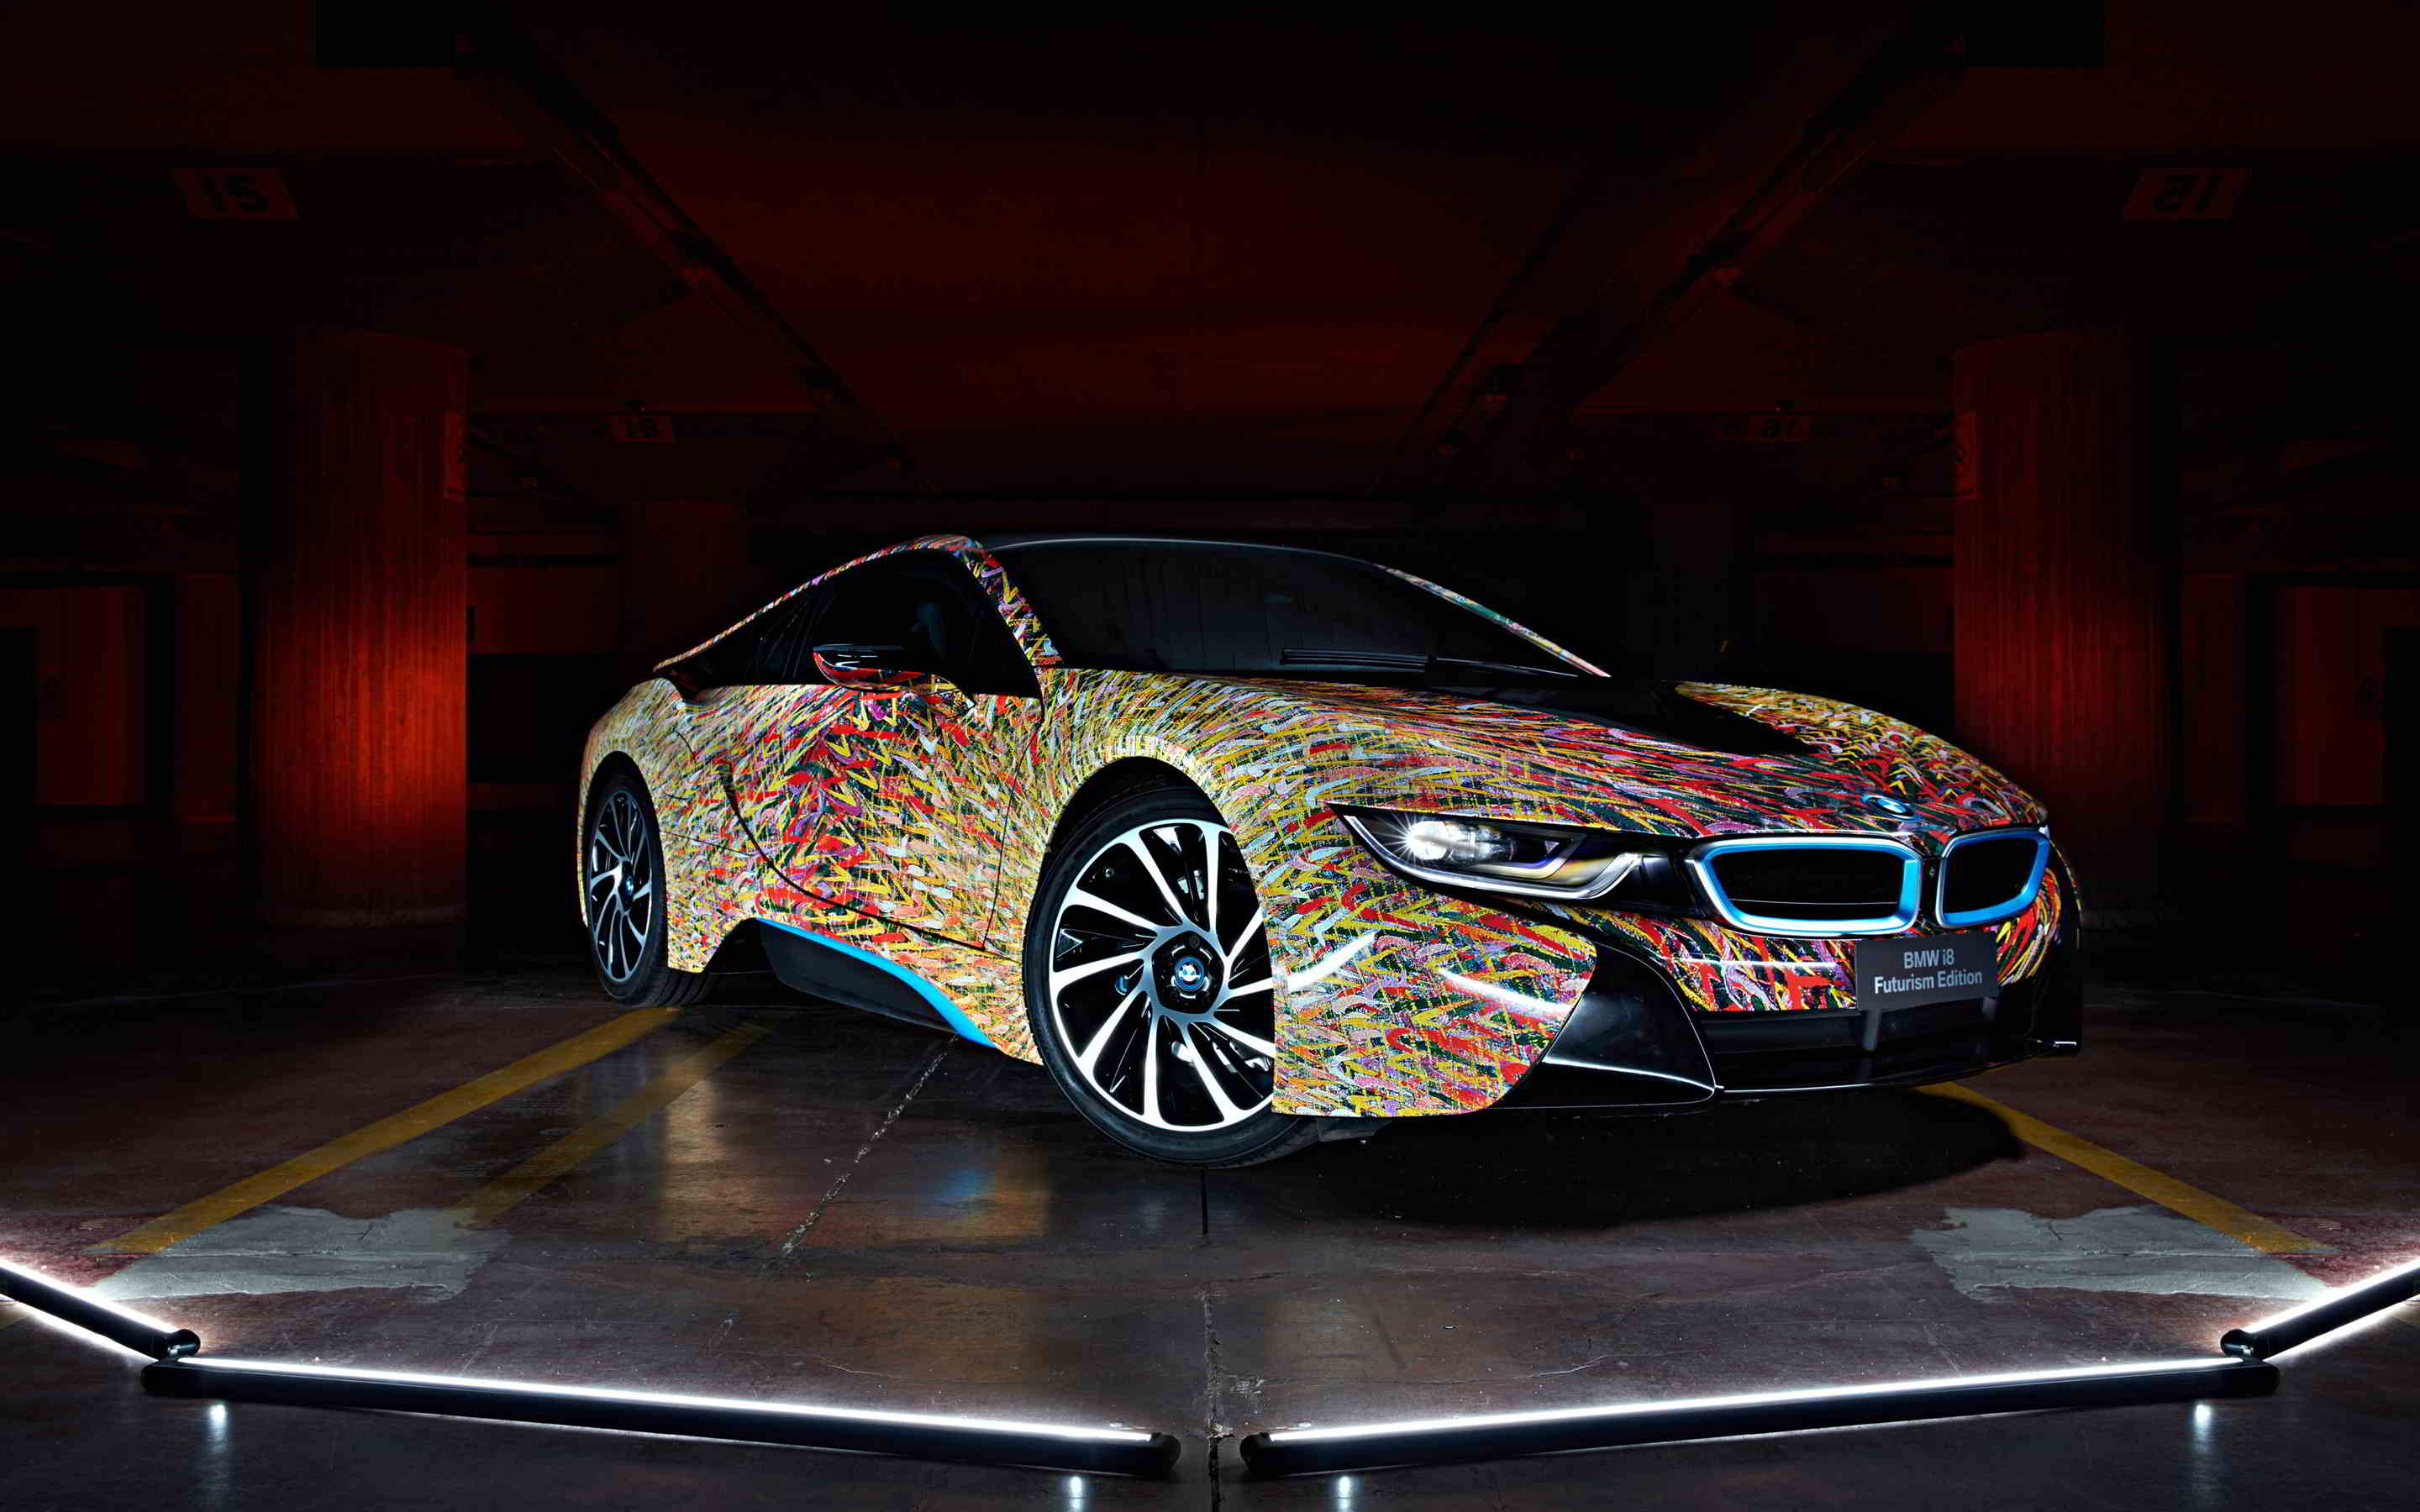 bmw i8 futurism edition cool car wallpapers